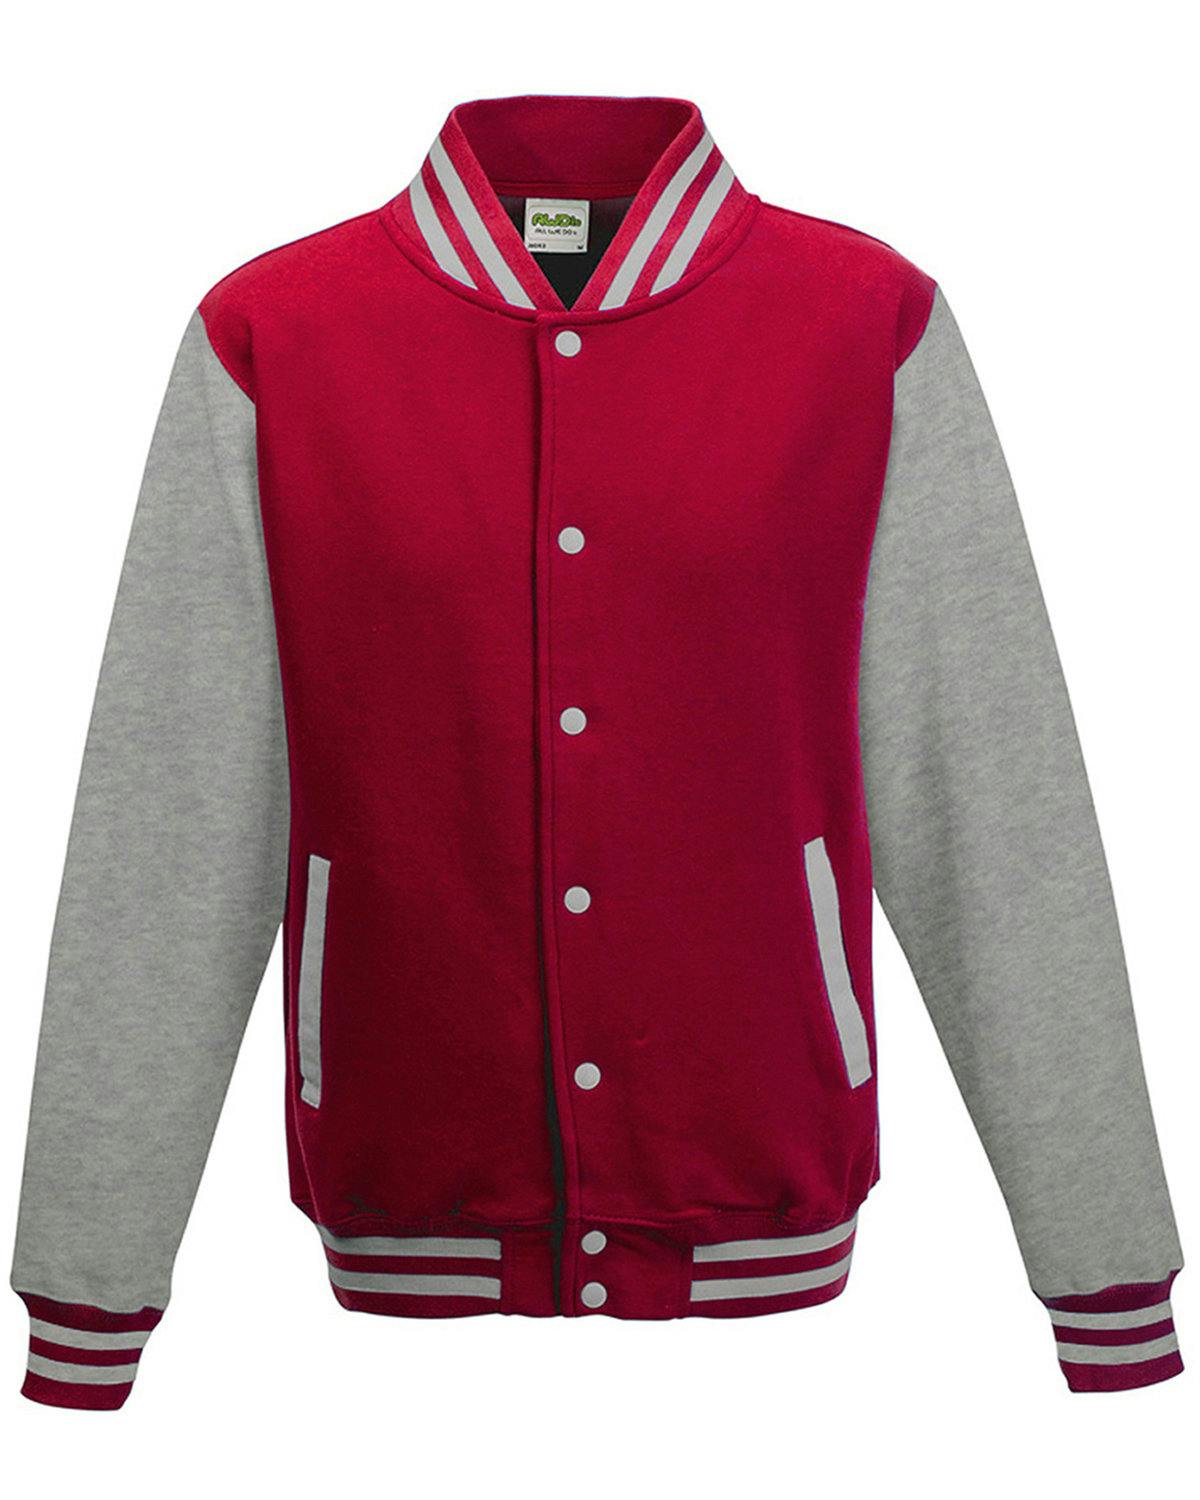 Image for Youth 80/20 Heavyweight Letterman Jacket